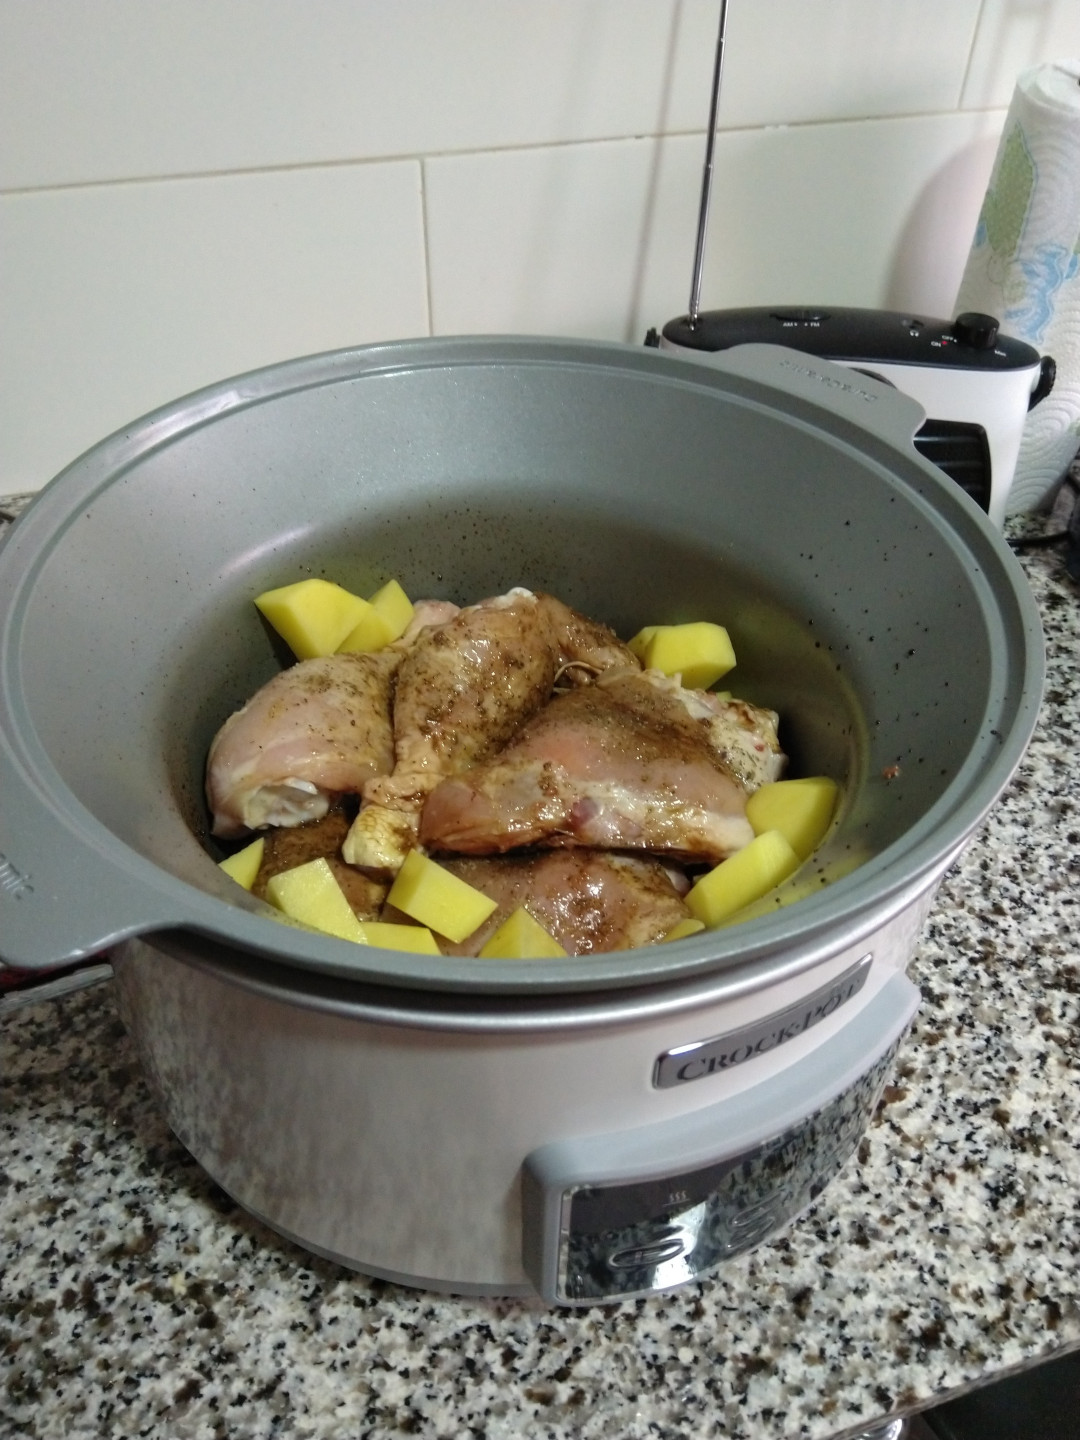 A slow cooker, such a nice present